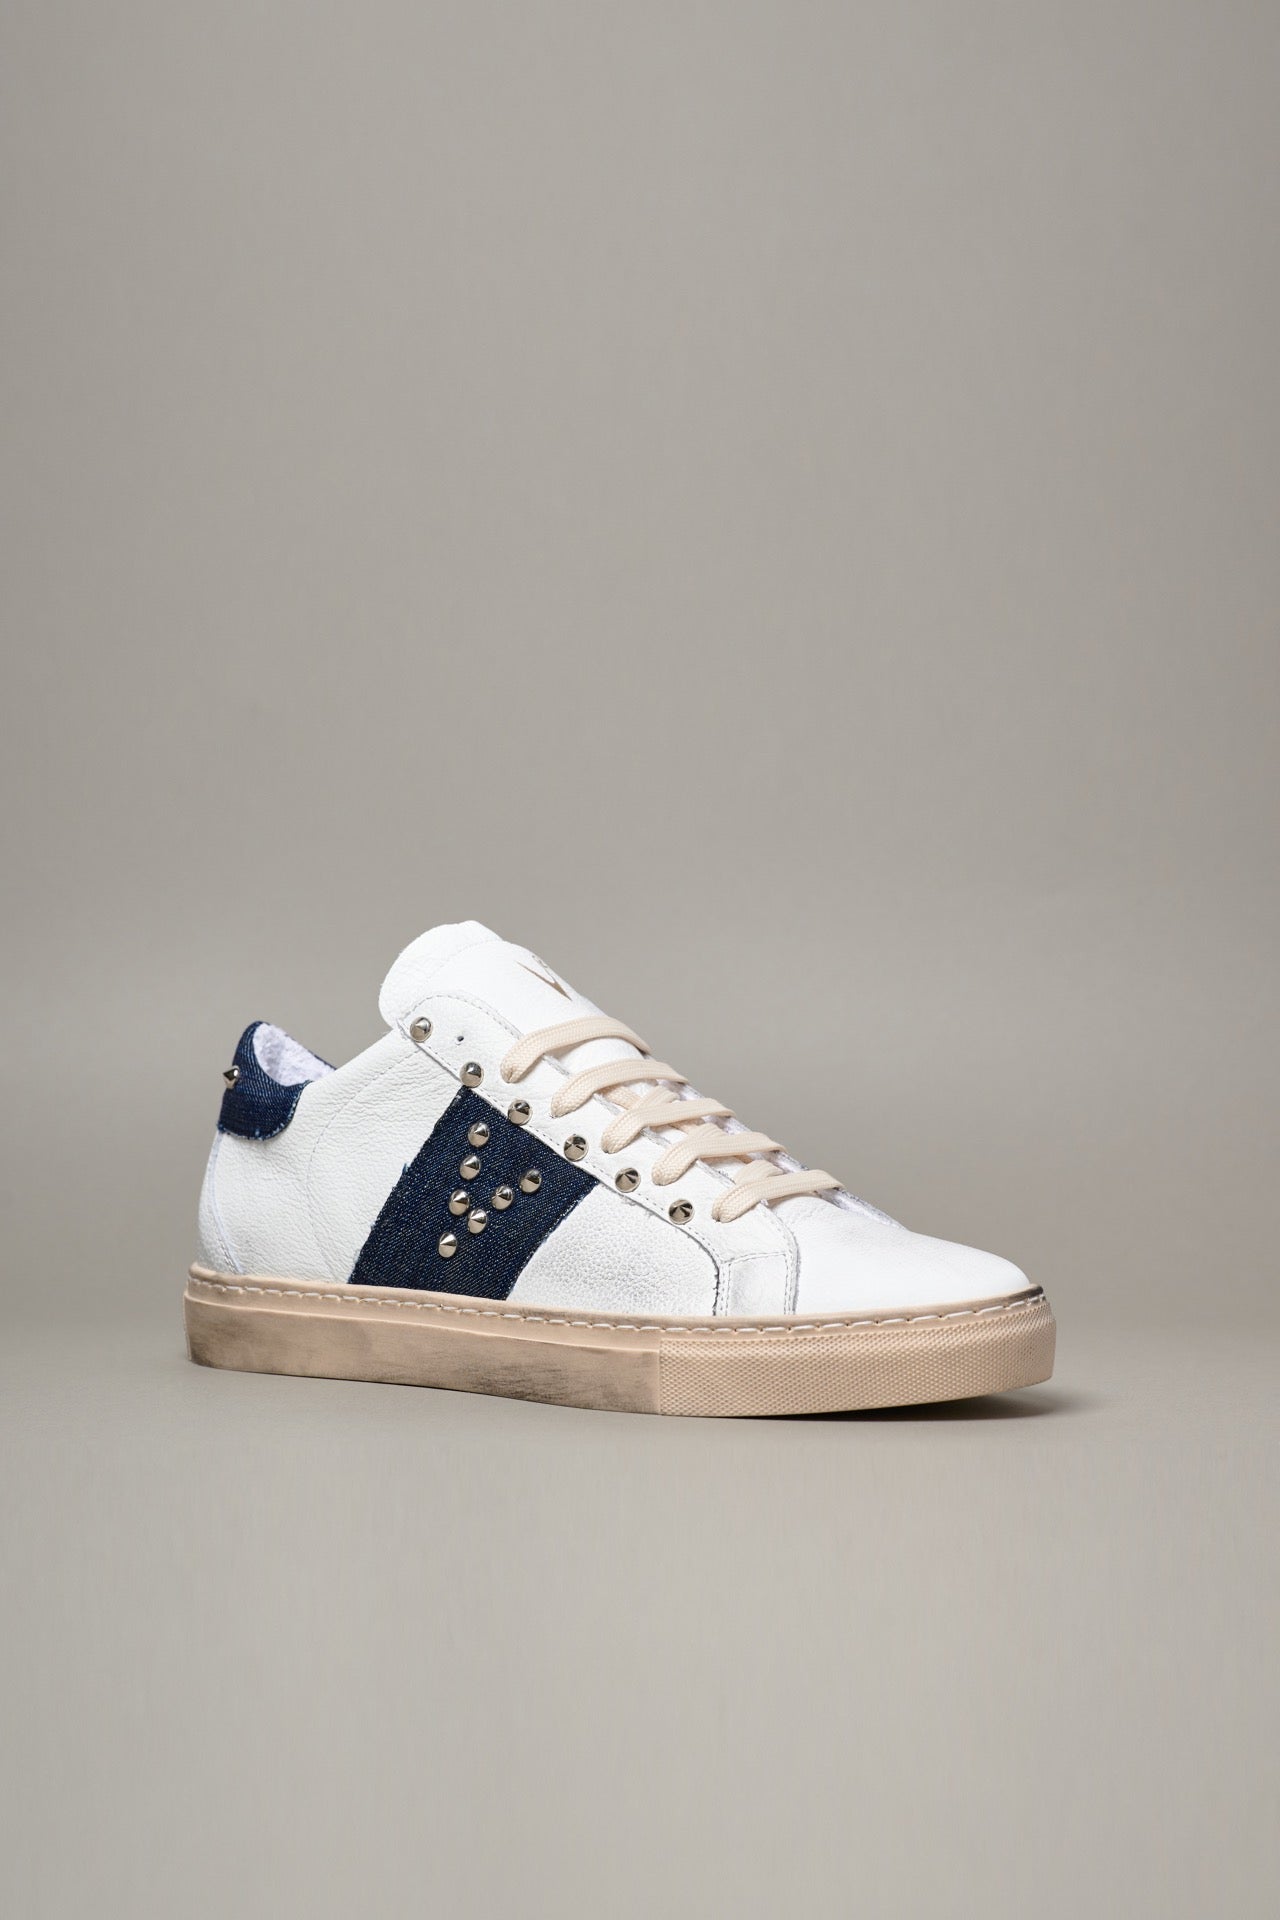 THUNDER - White Sneakers with back and side band in Jeans fabric and Studs